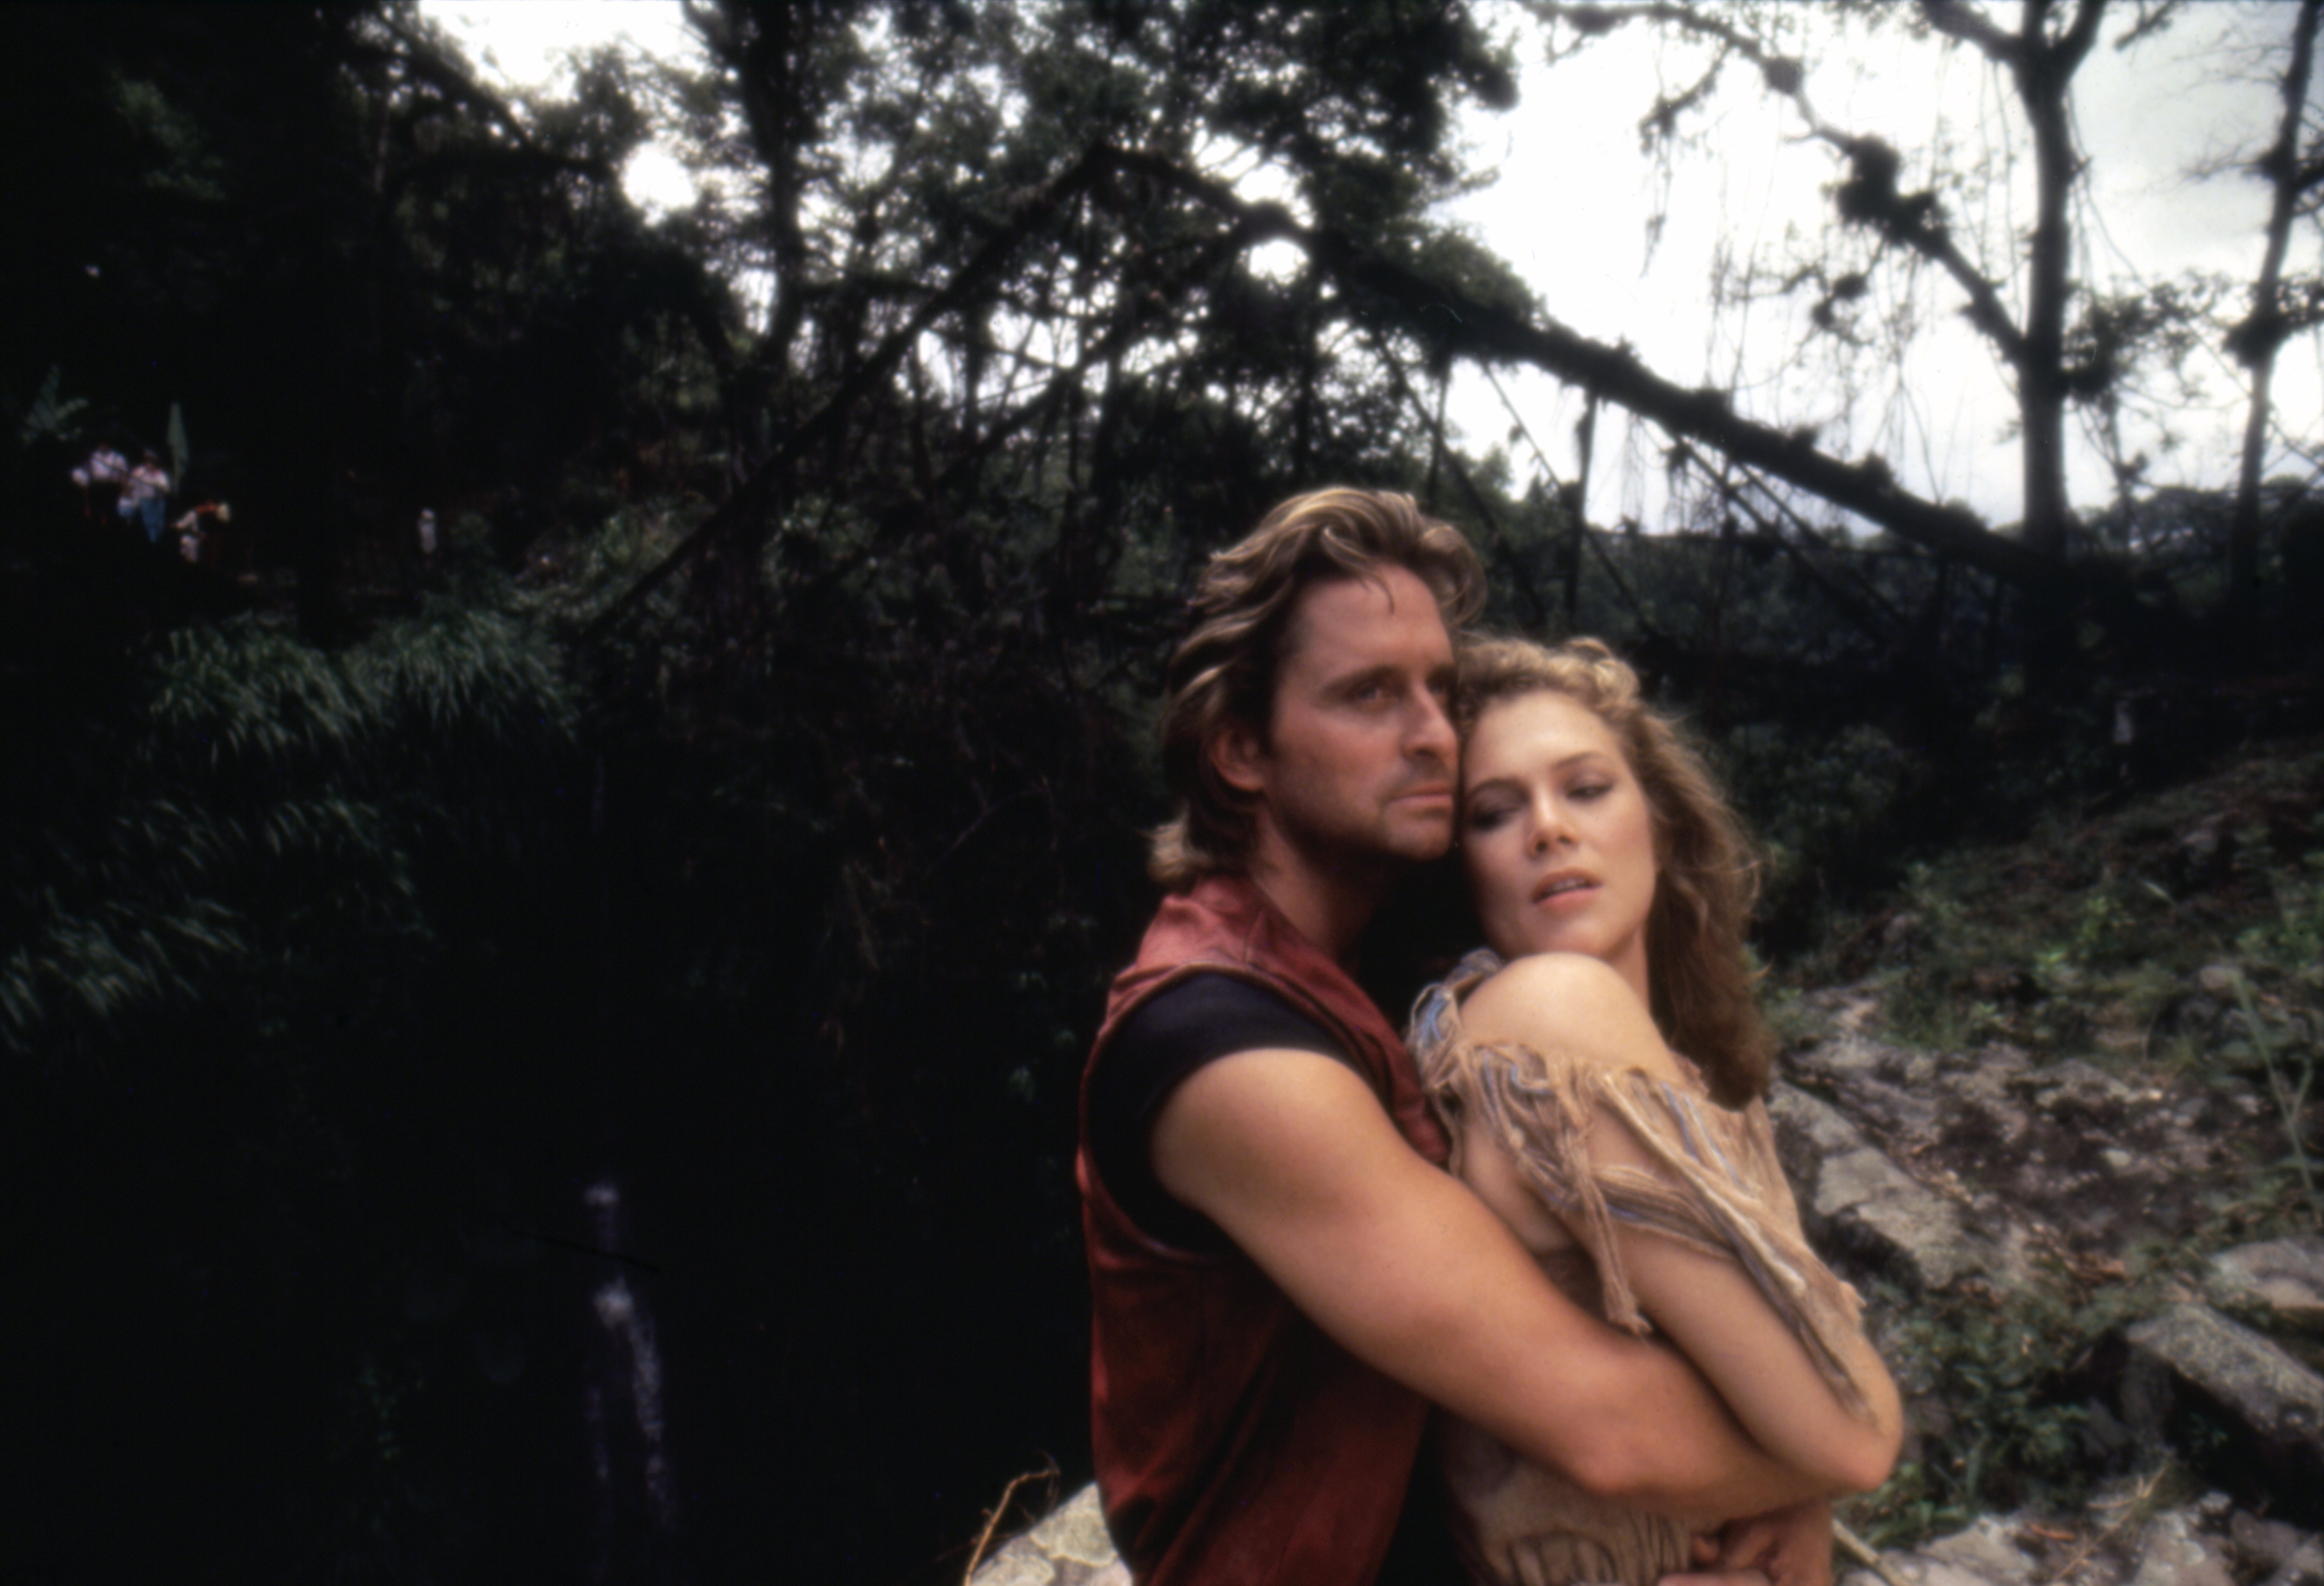 Michael Douglas and Kathleen Turner on the set of "Romancing the Stone" in 1984 | Source: Getty Images